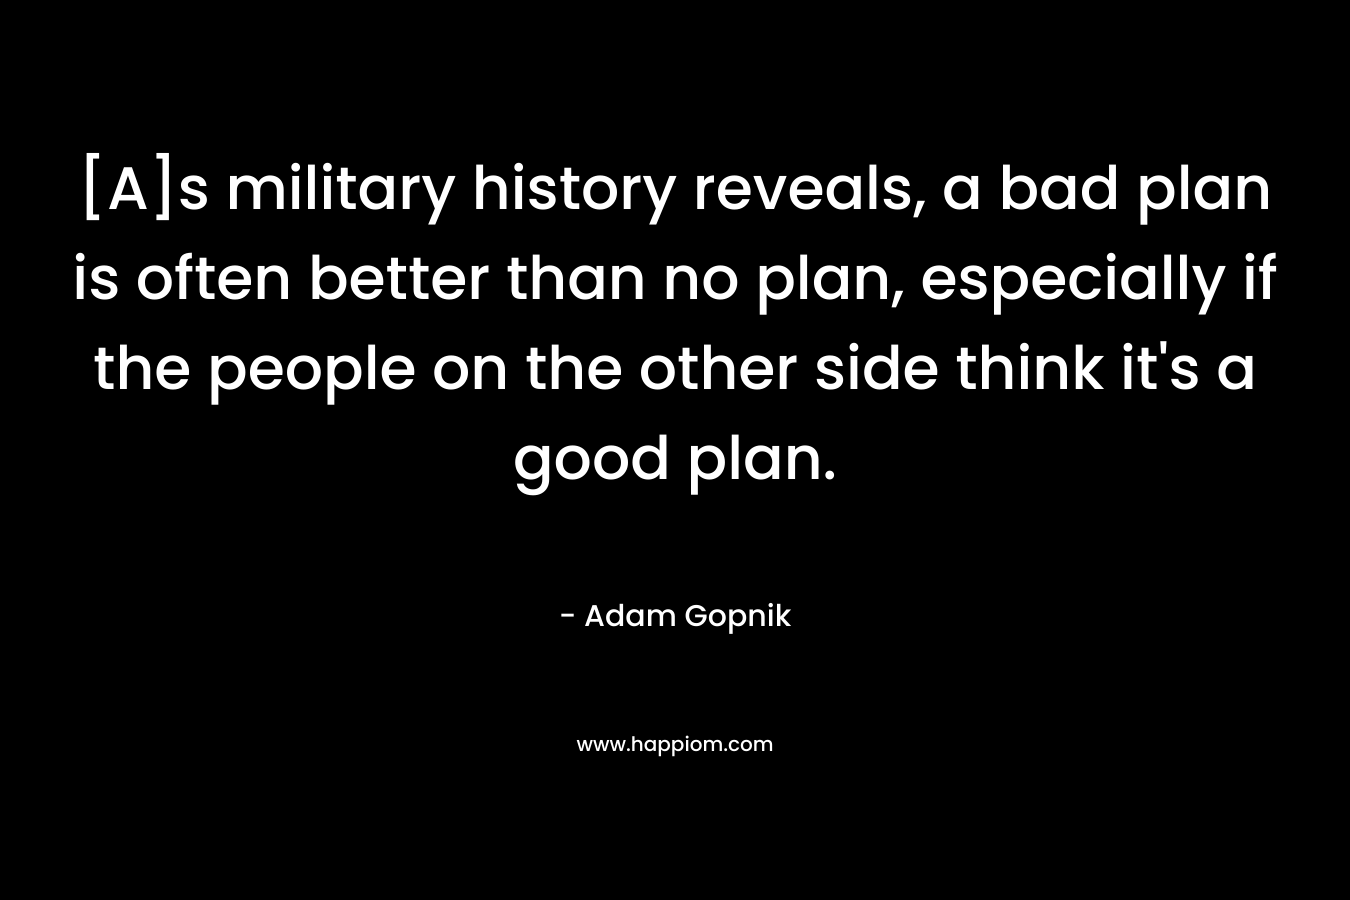 [A]s military history reveals, a bad plan is often better than no plan, especially if the people on the other side think it’s a good plan. – Adam Gopnik